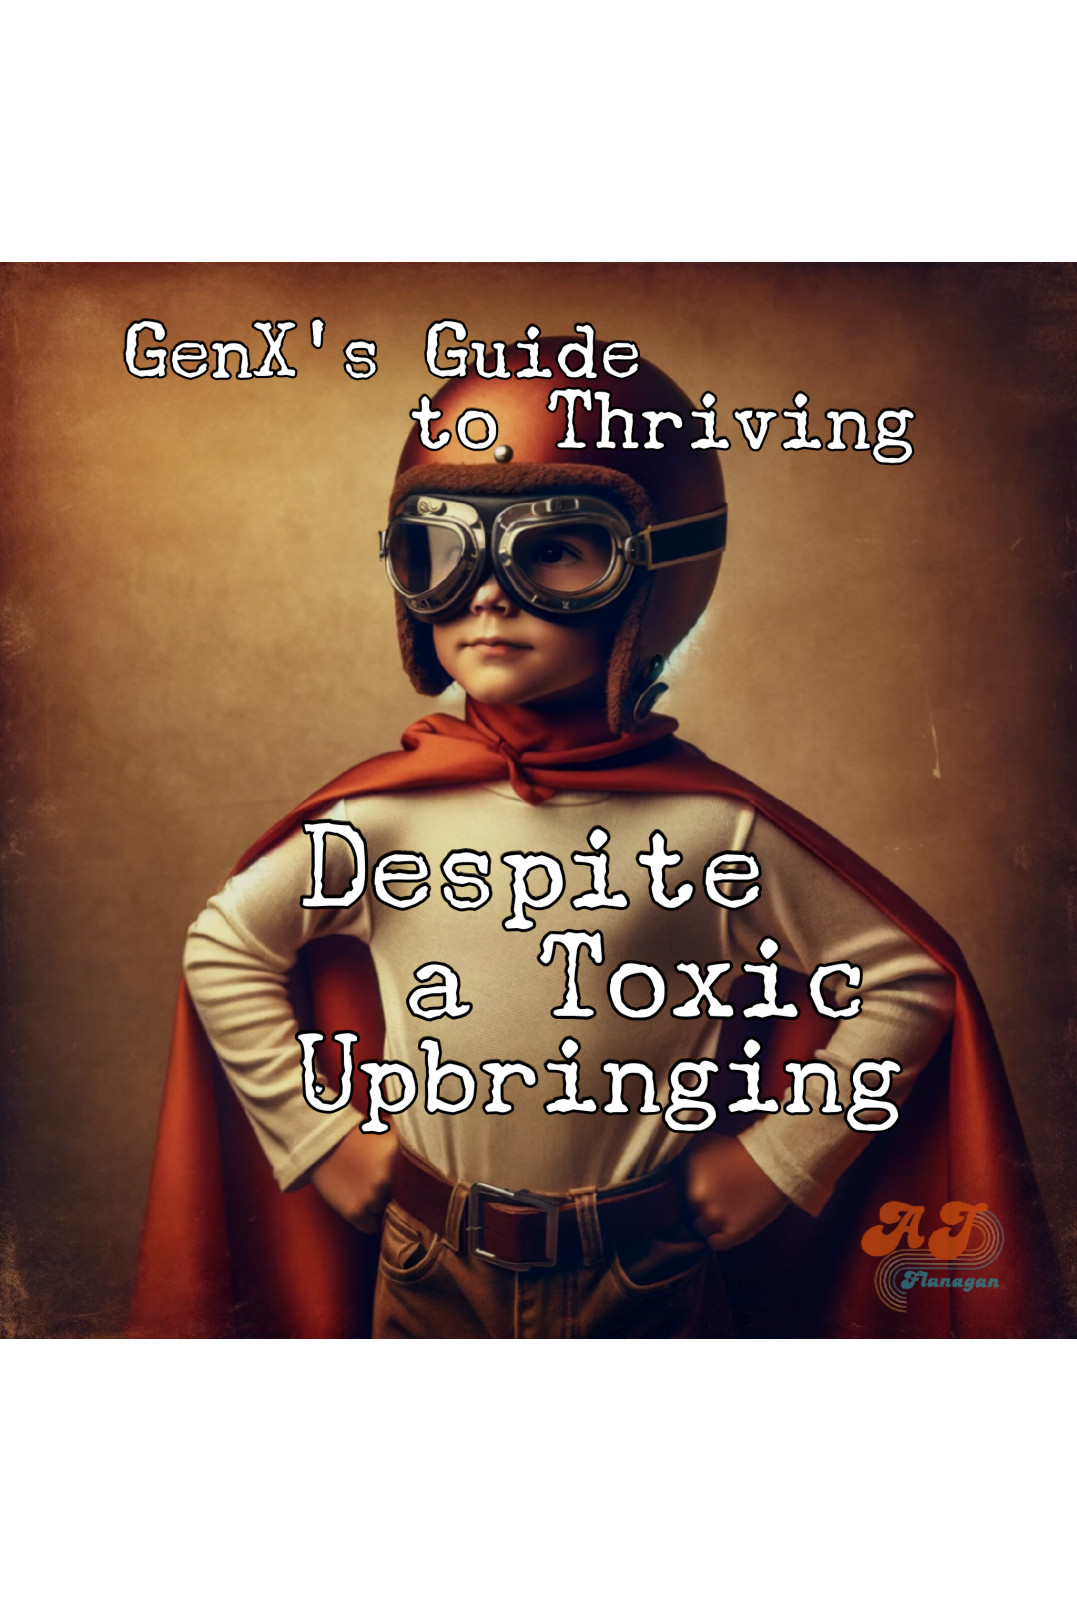 GenX's Guide to Thriving Despite a Toxic Upbringing: Humor, Health, and Hindsight